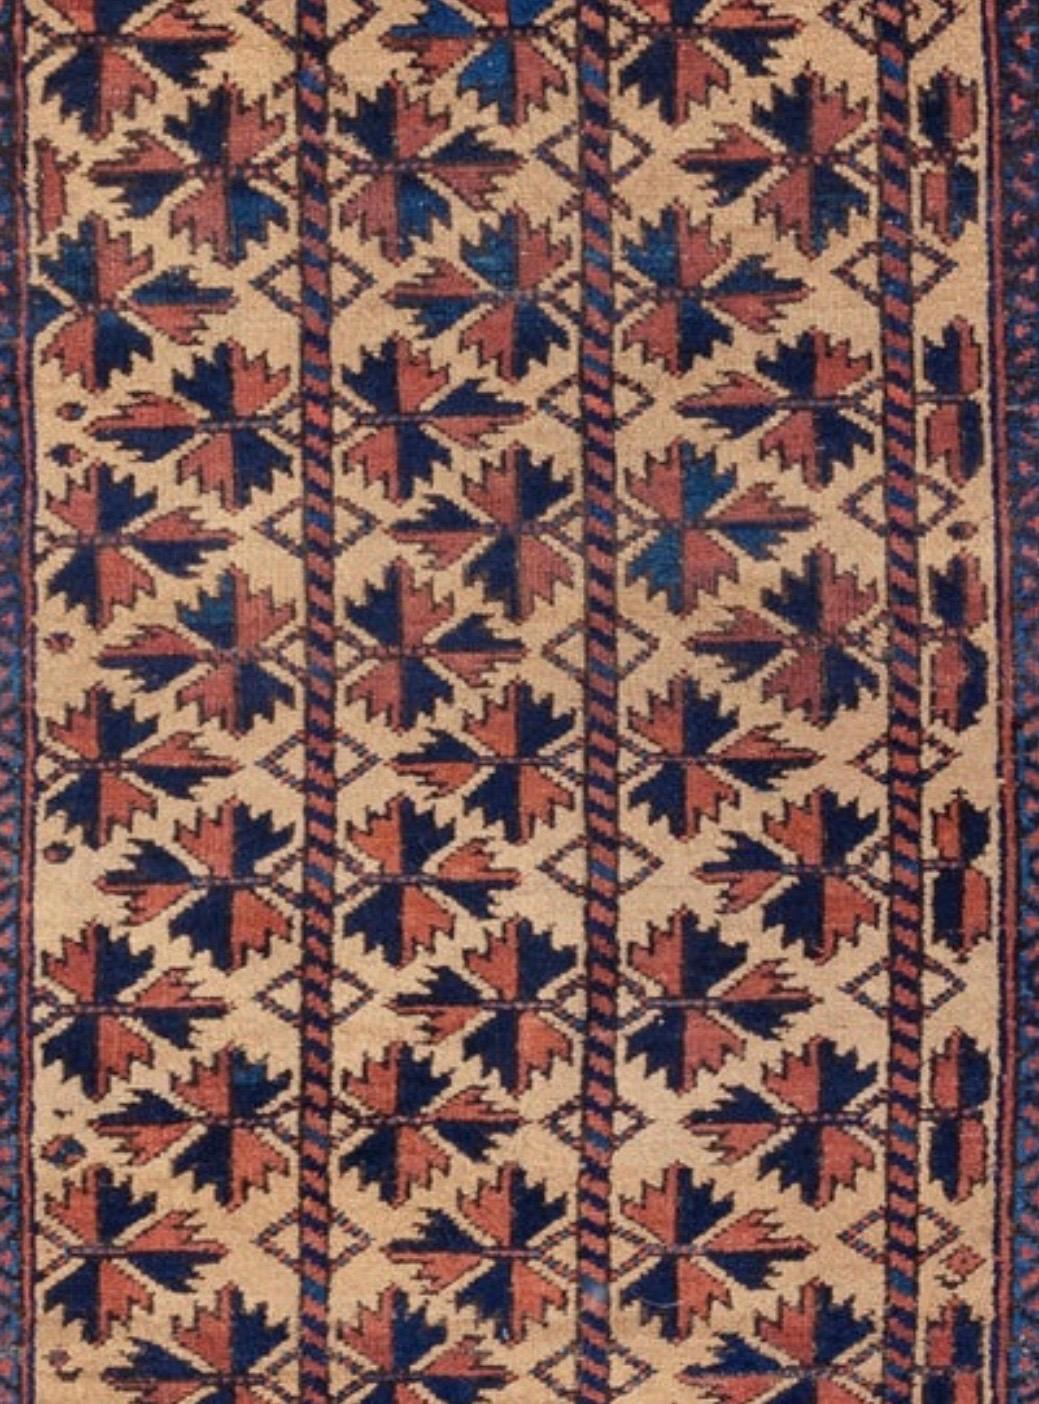 Baluch carpets are handmade carpets originally made by Baluch nomads, living near the border between Iran, Pakistan and Afghanistan. The carpets are often small with lively patterns, and praying carpets are common. The dominating colors are red,